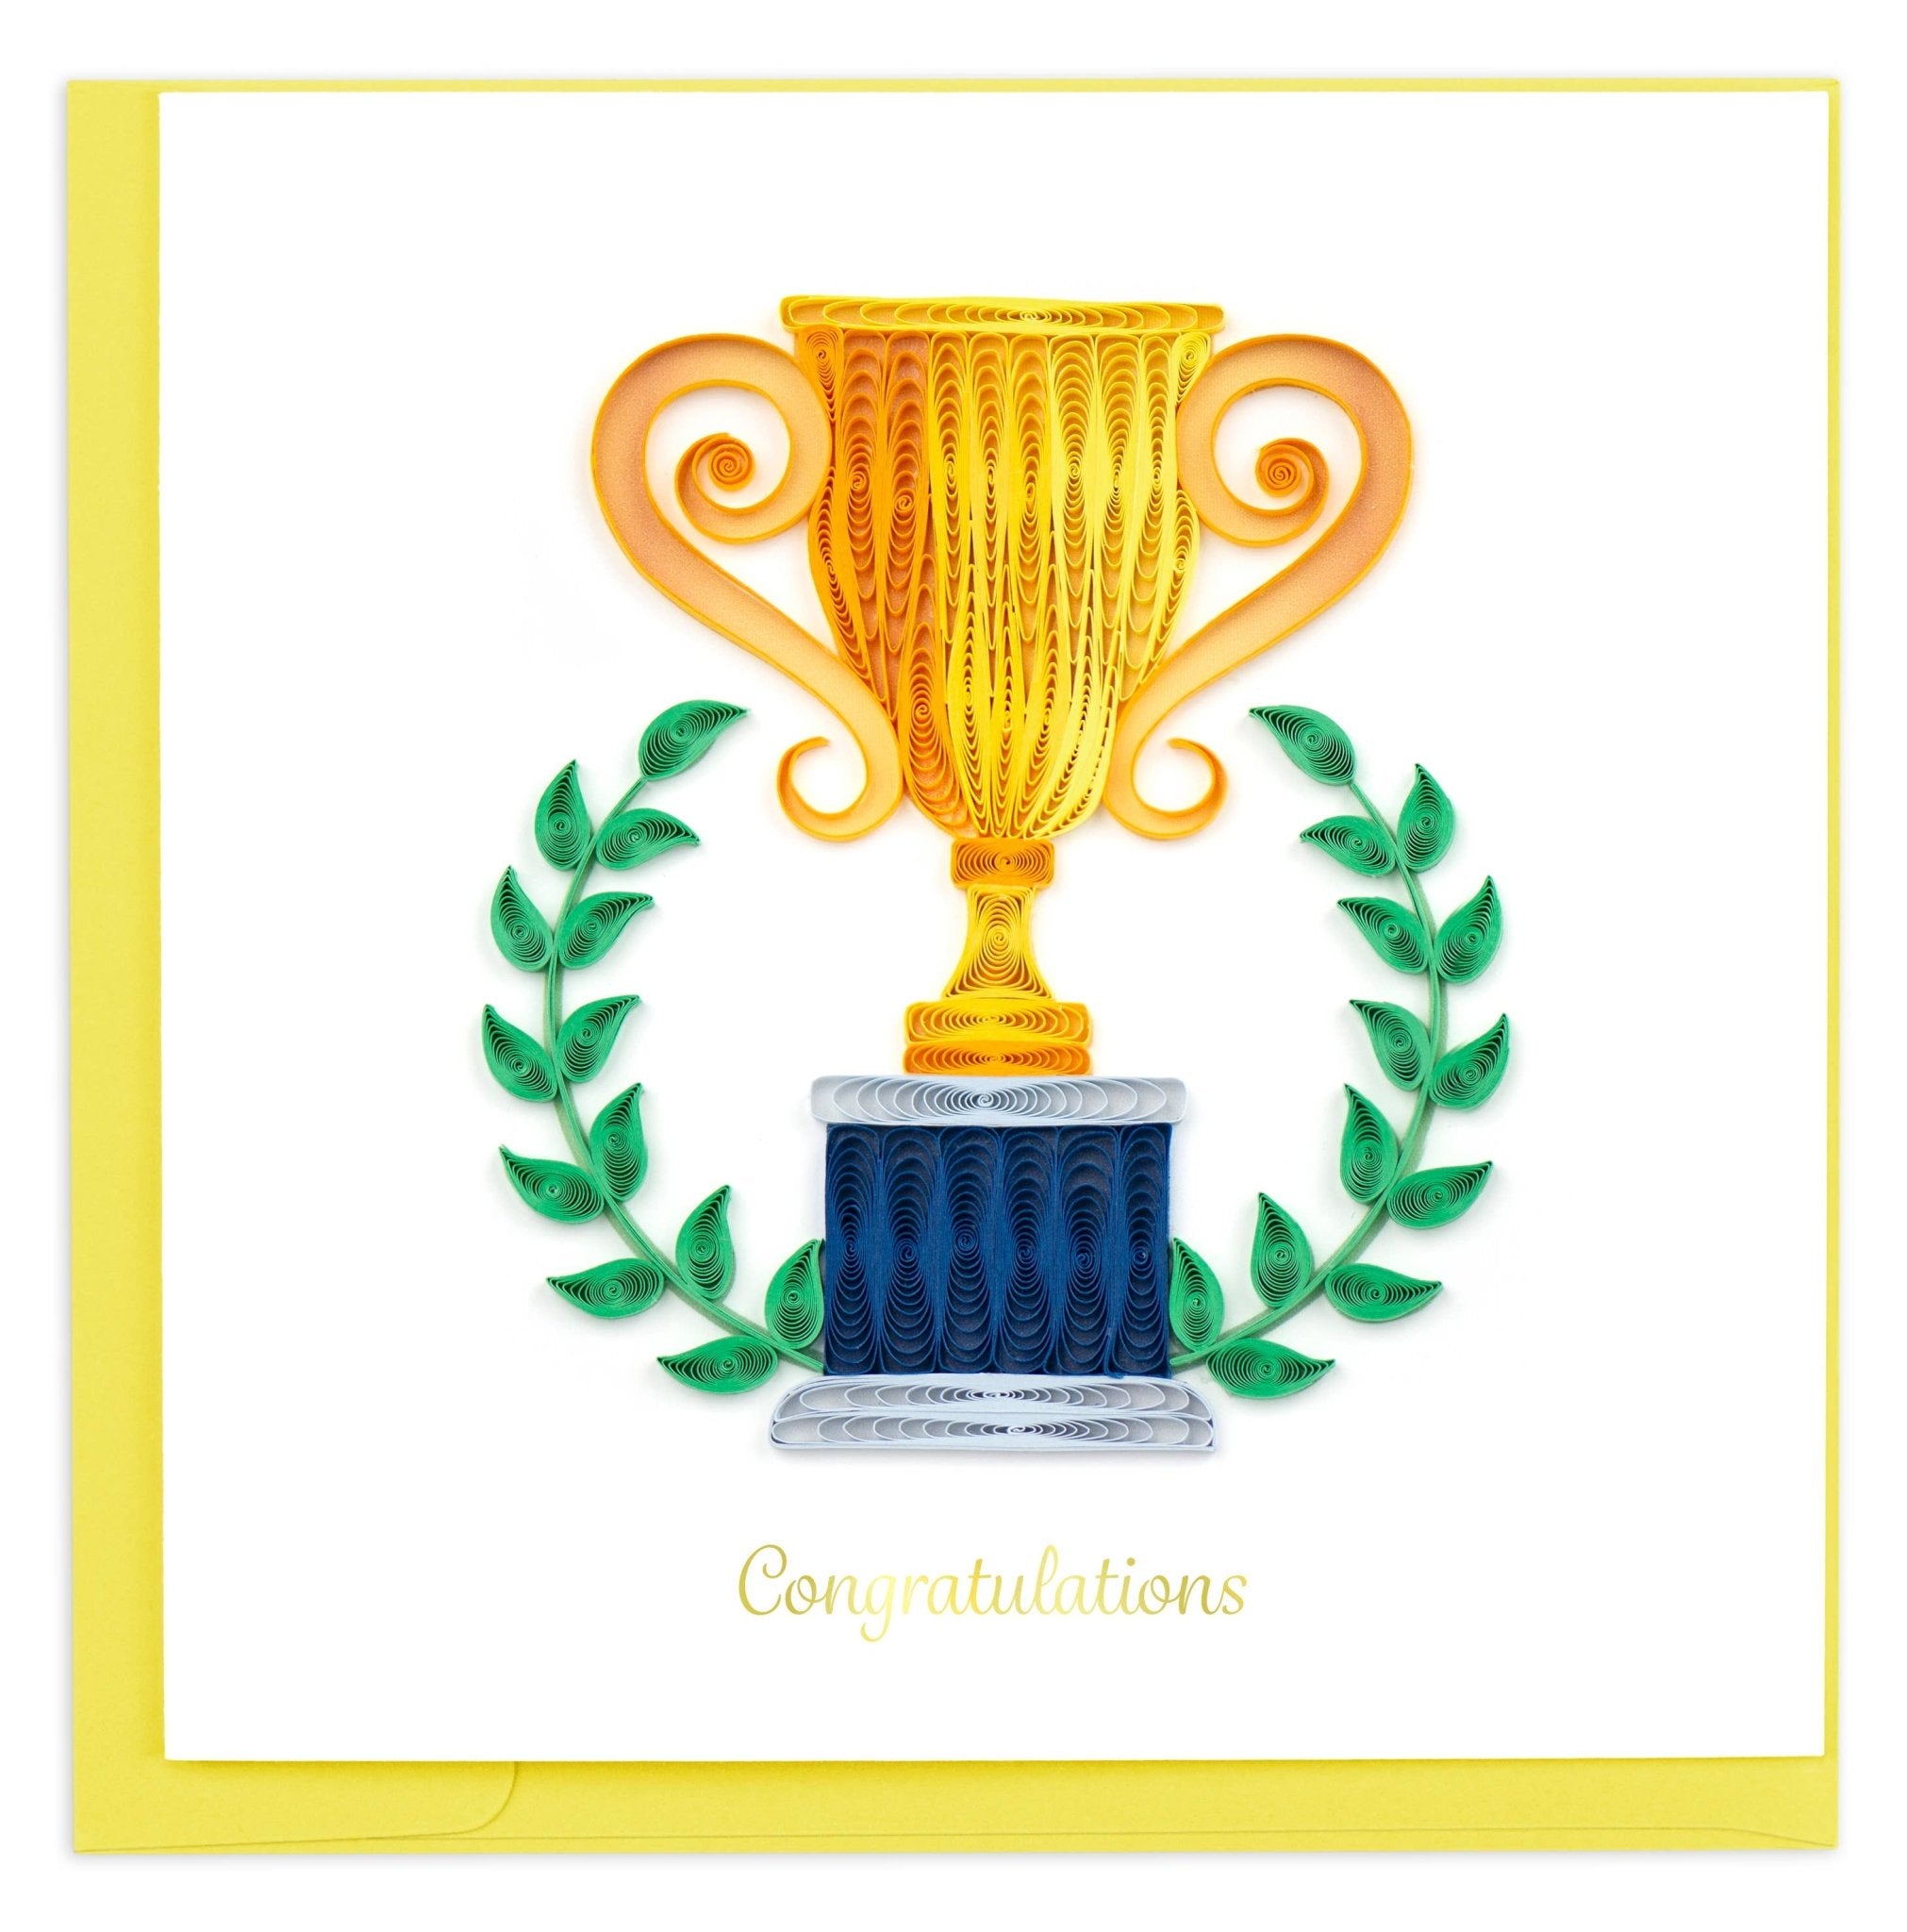 Congrats Trophy Quilling Card - Spiral Circle